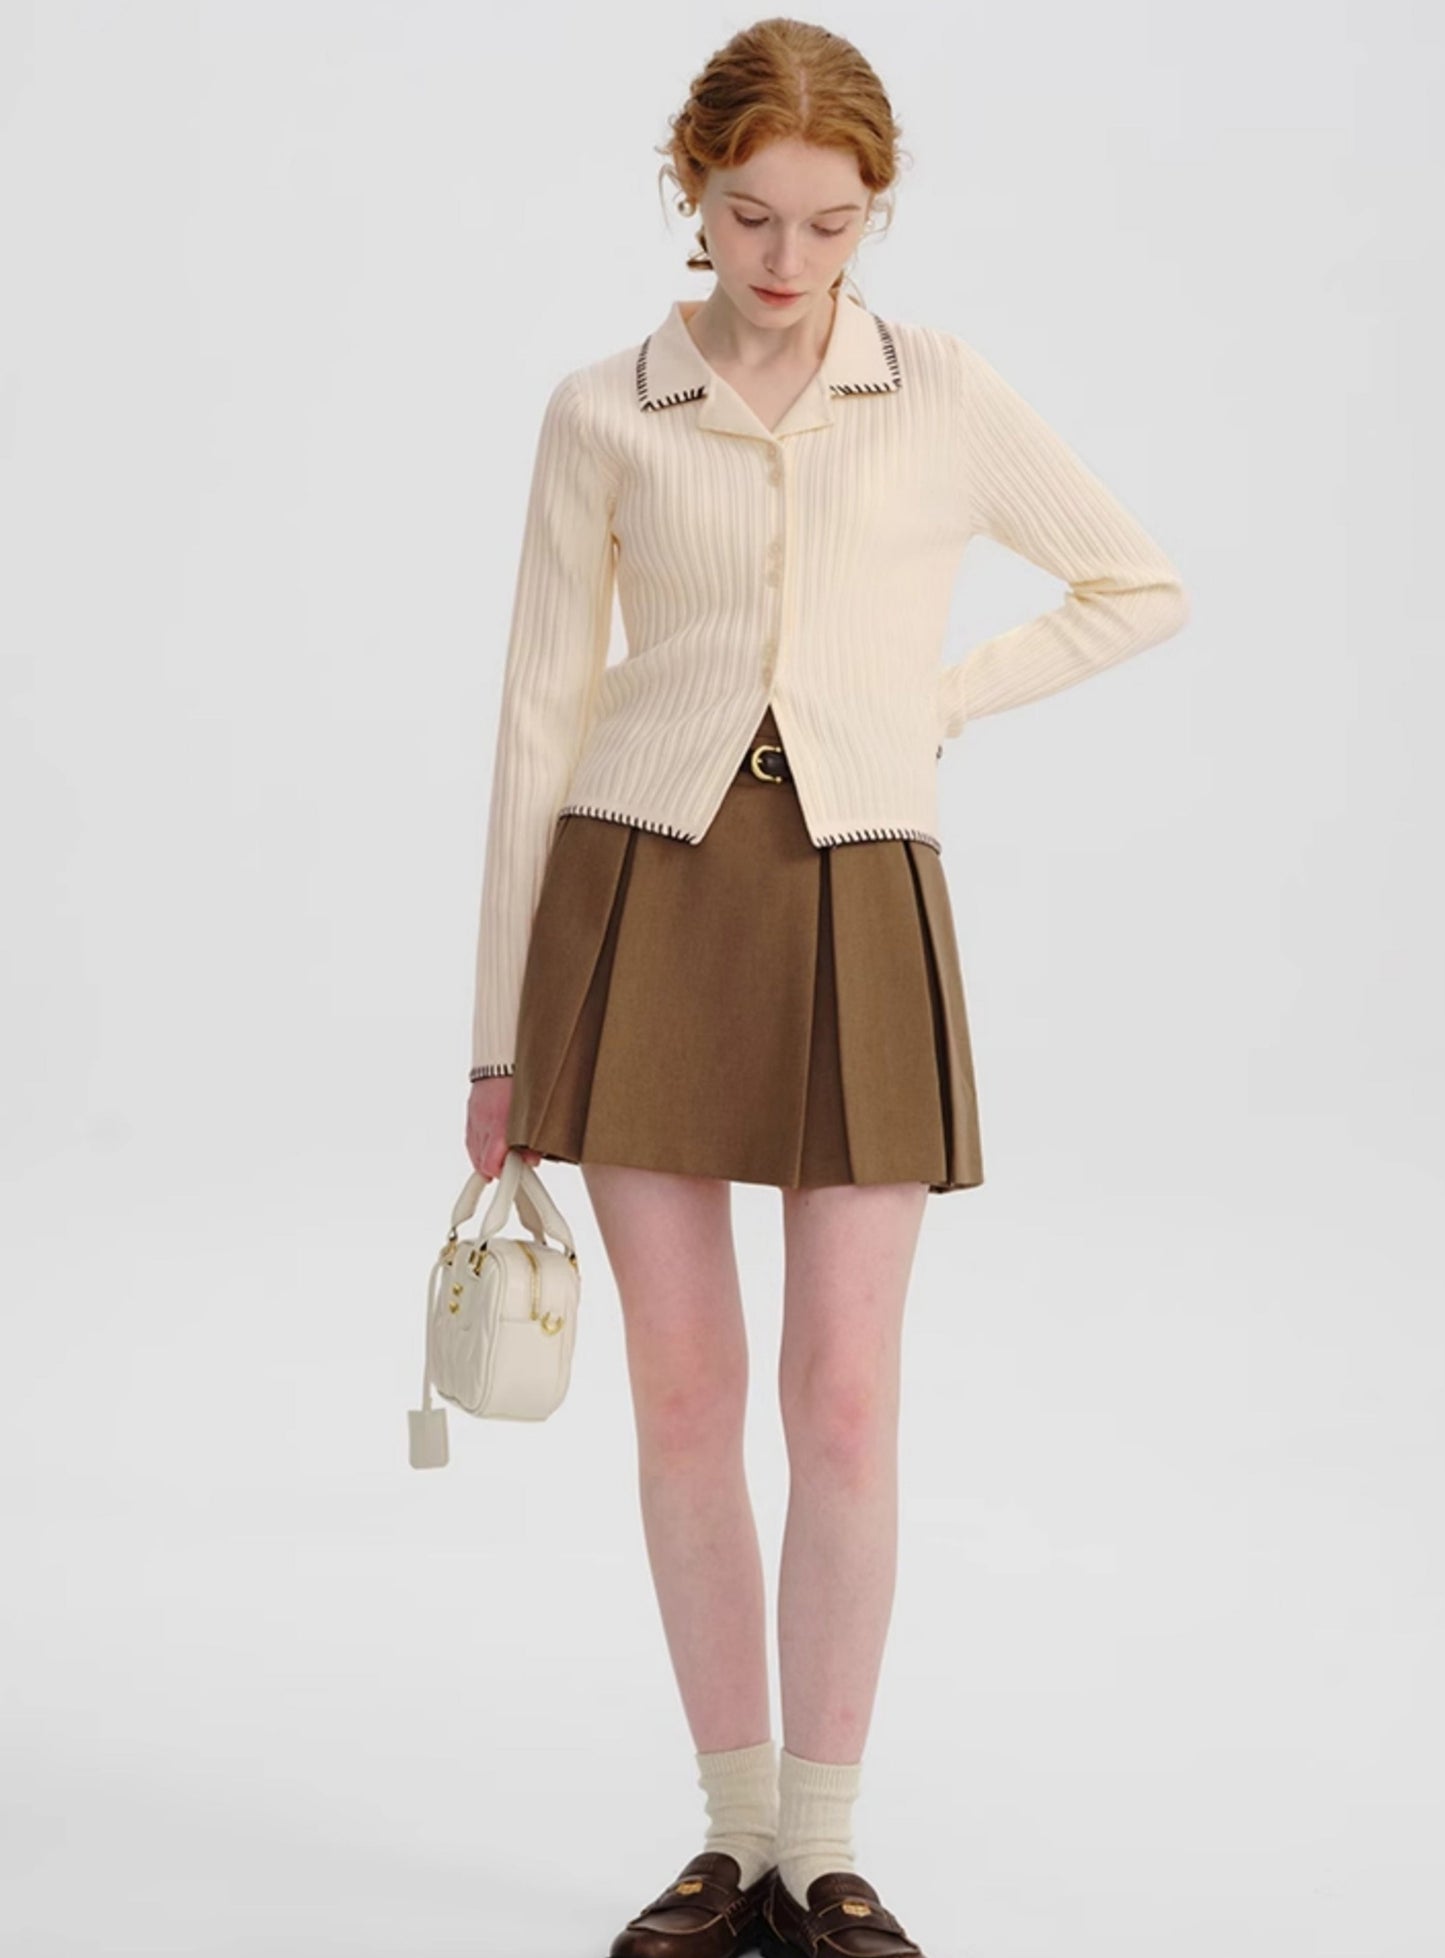 French lapel short knit tops